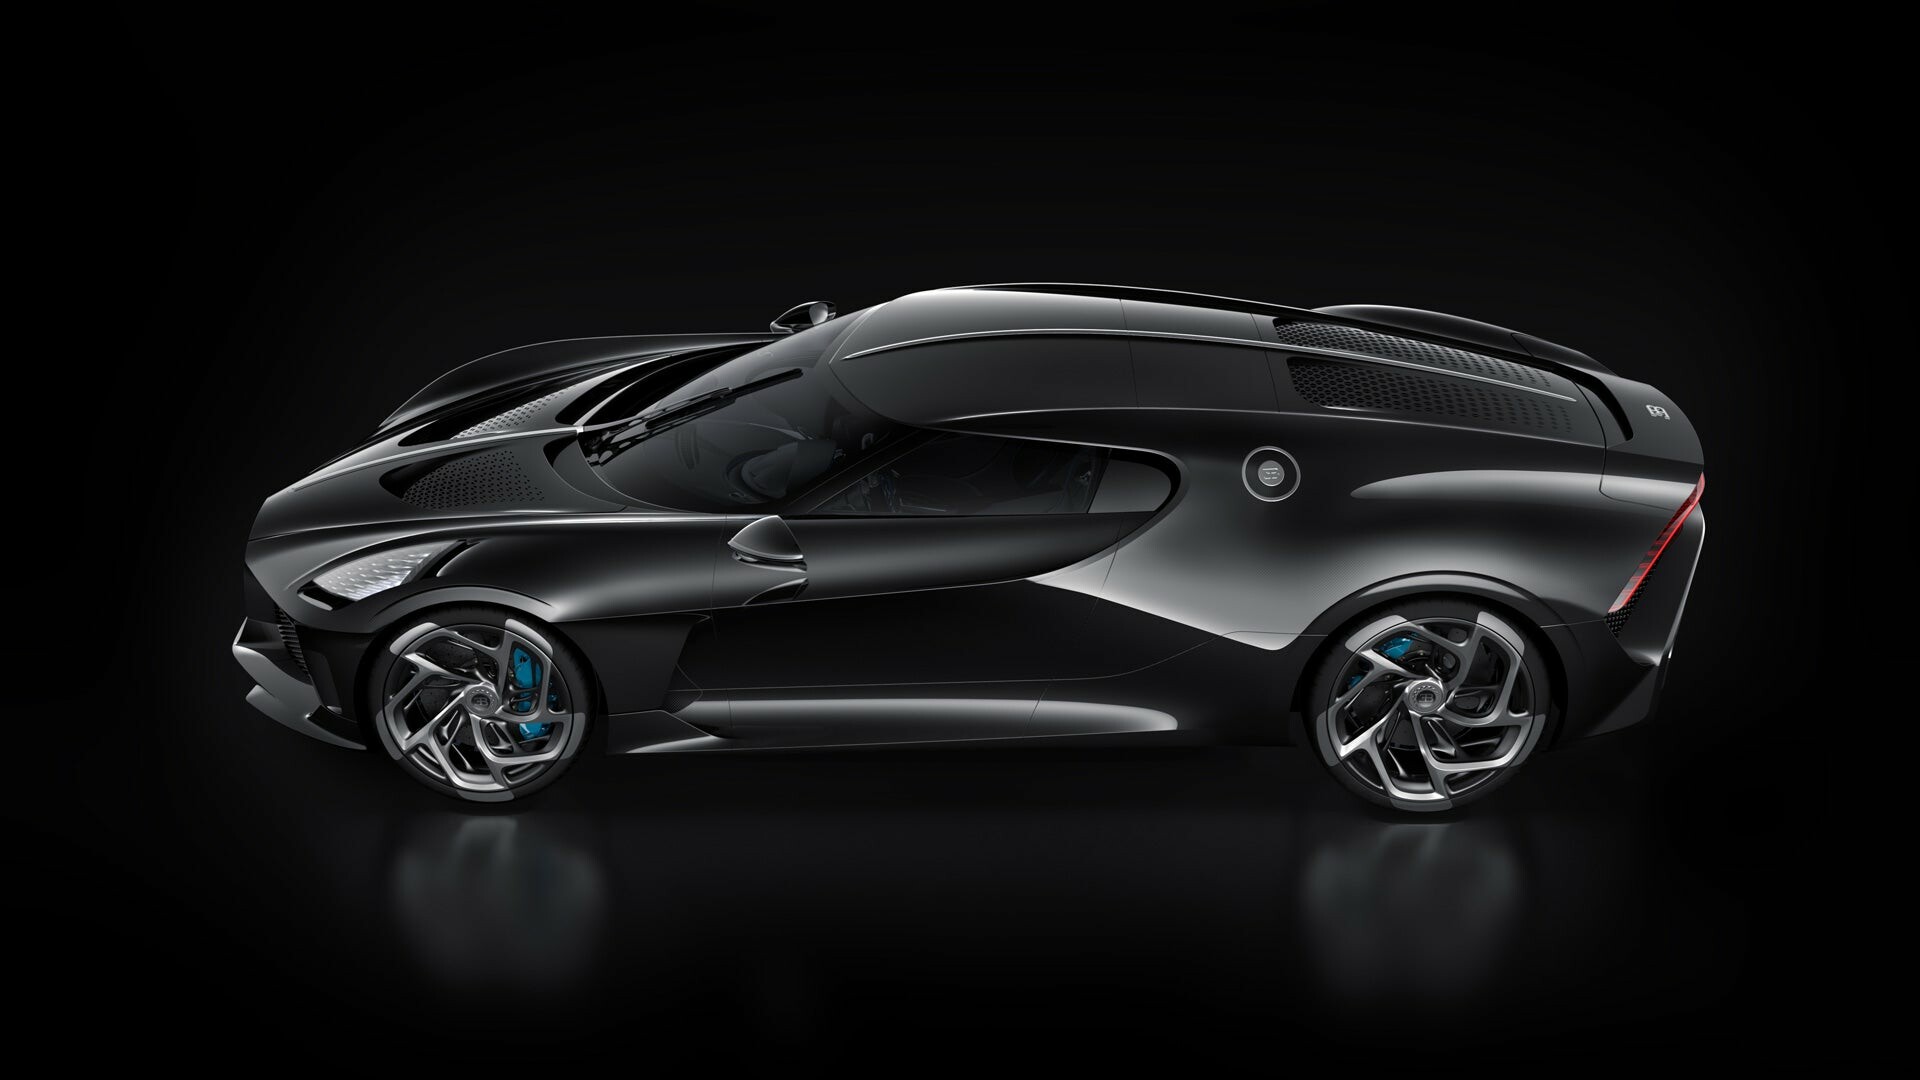 Bugatti La Voiture Noire: The car was added in the Asphalt 9: Legends as a high Class S car. 1920x1080 Full HD Background.